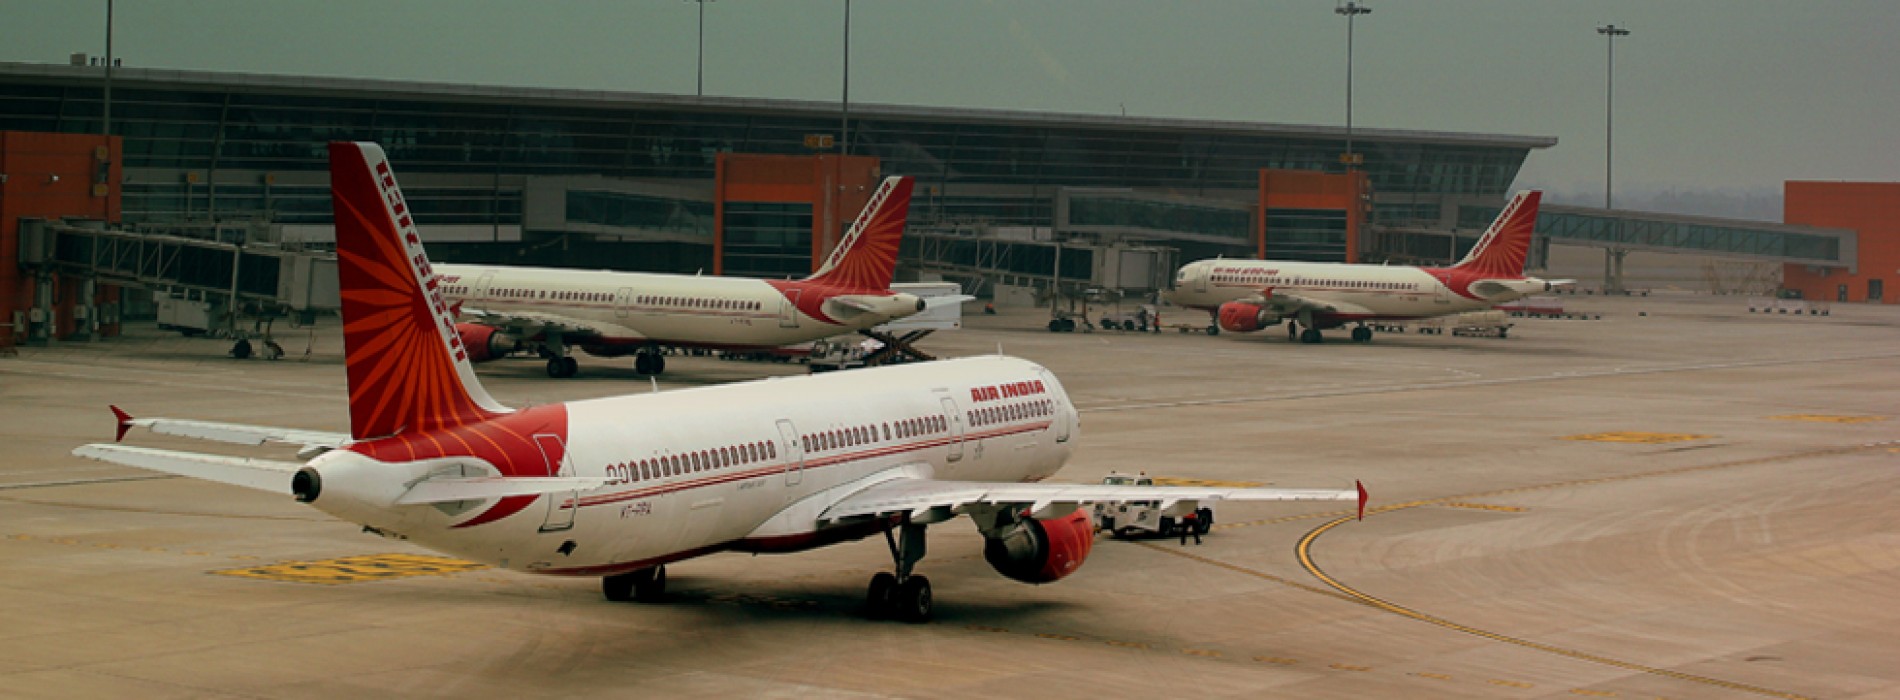 Foreign airlines may be allowed to bid for Air India